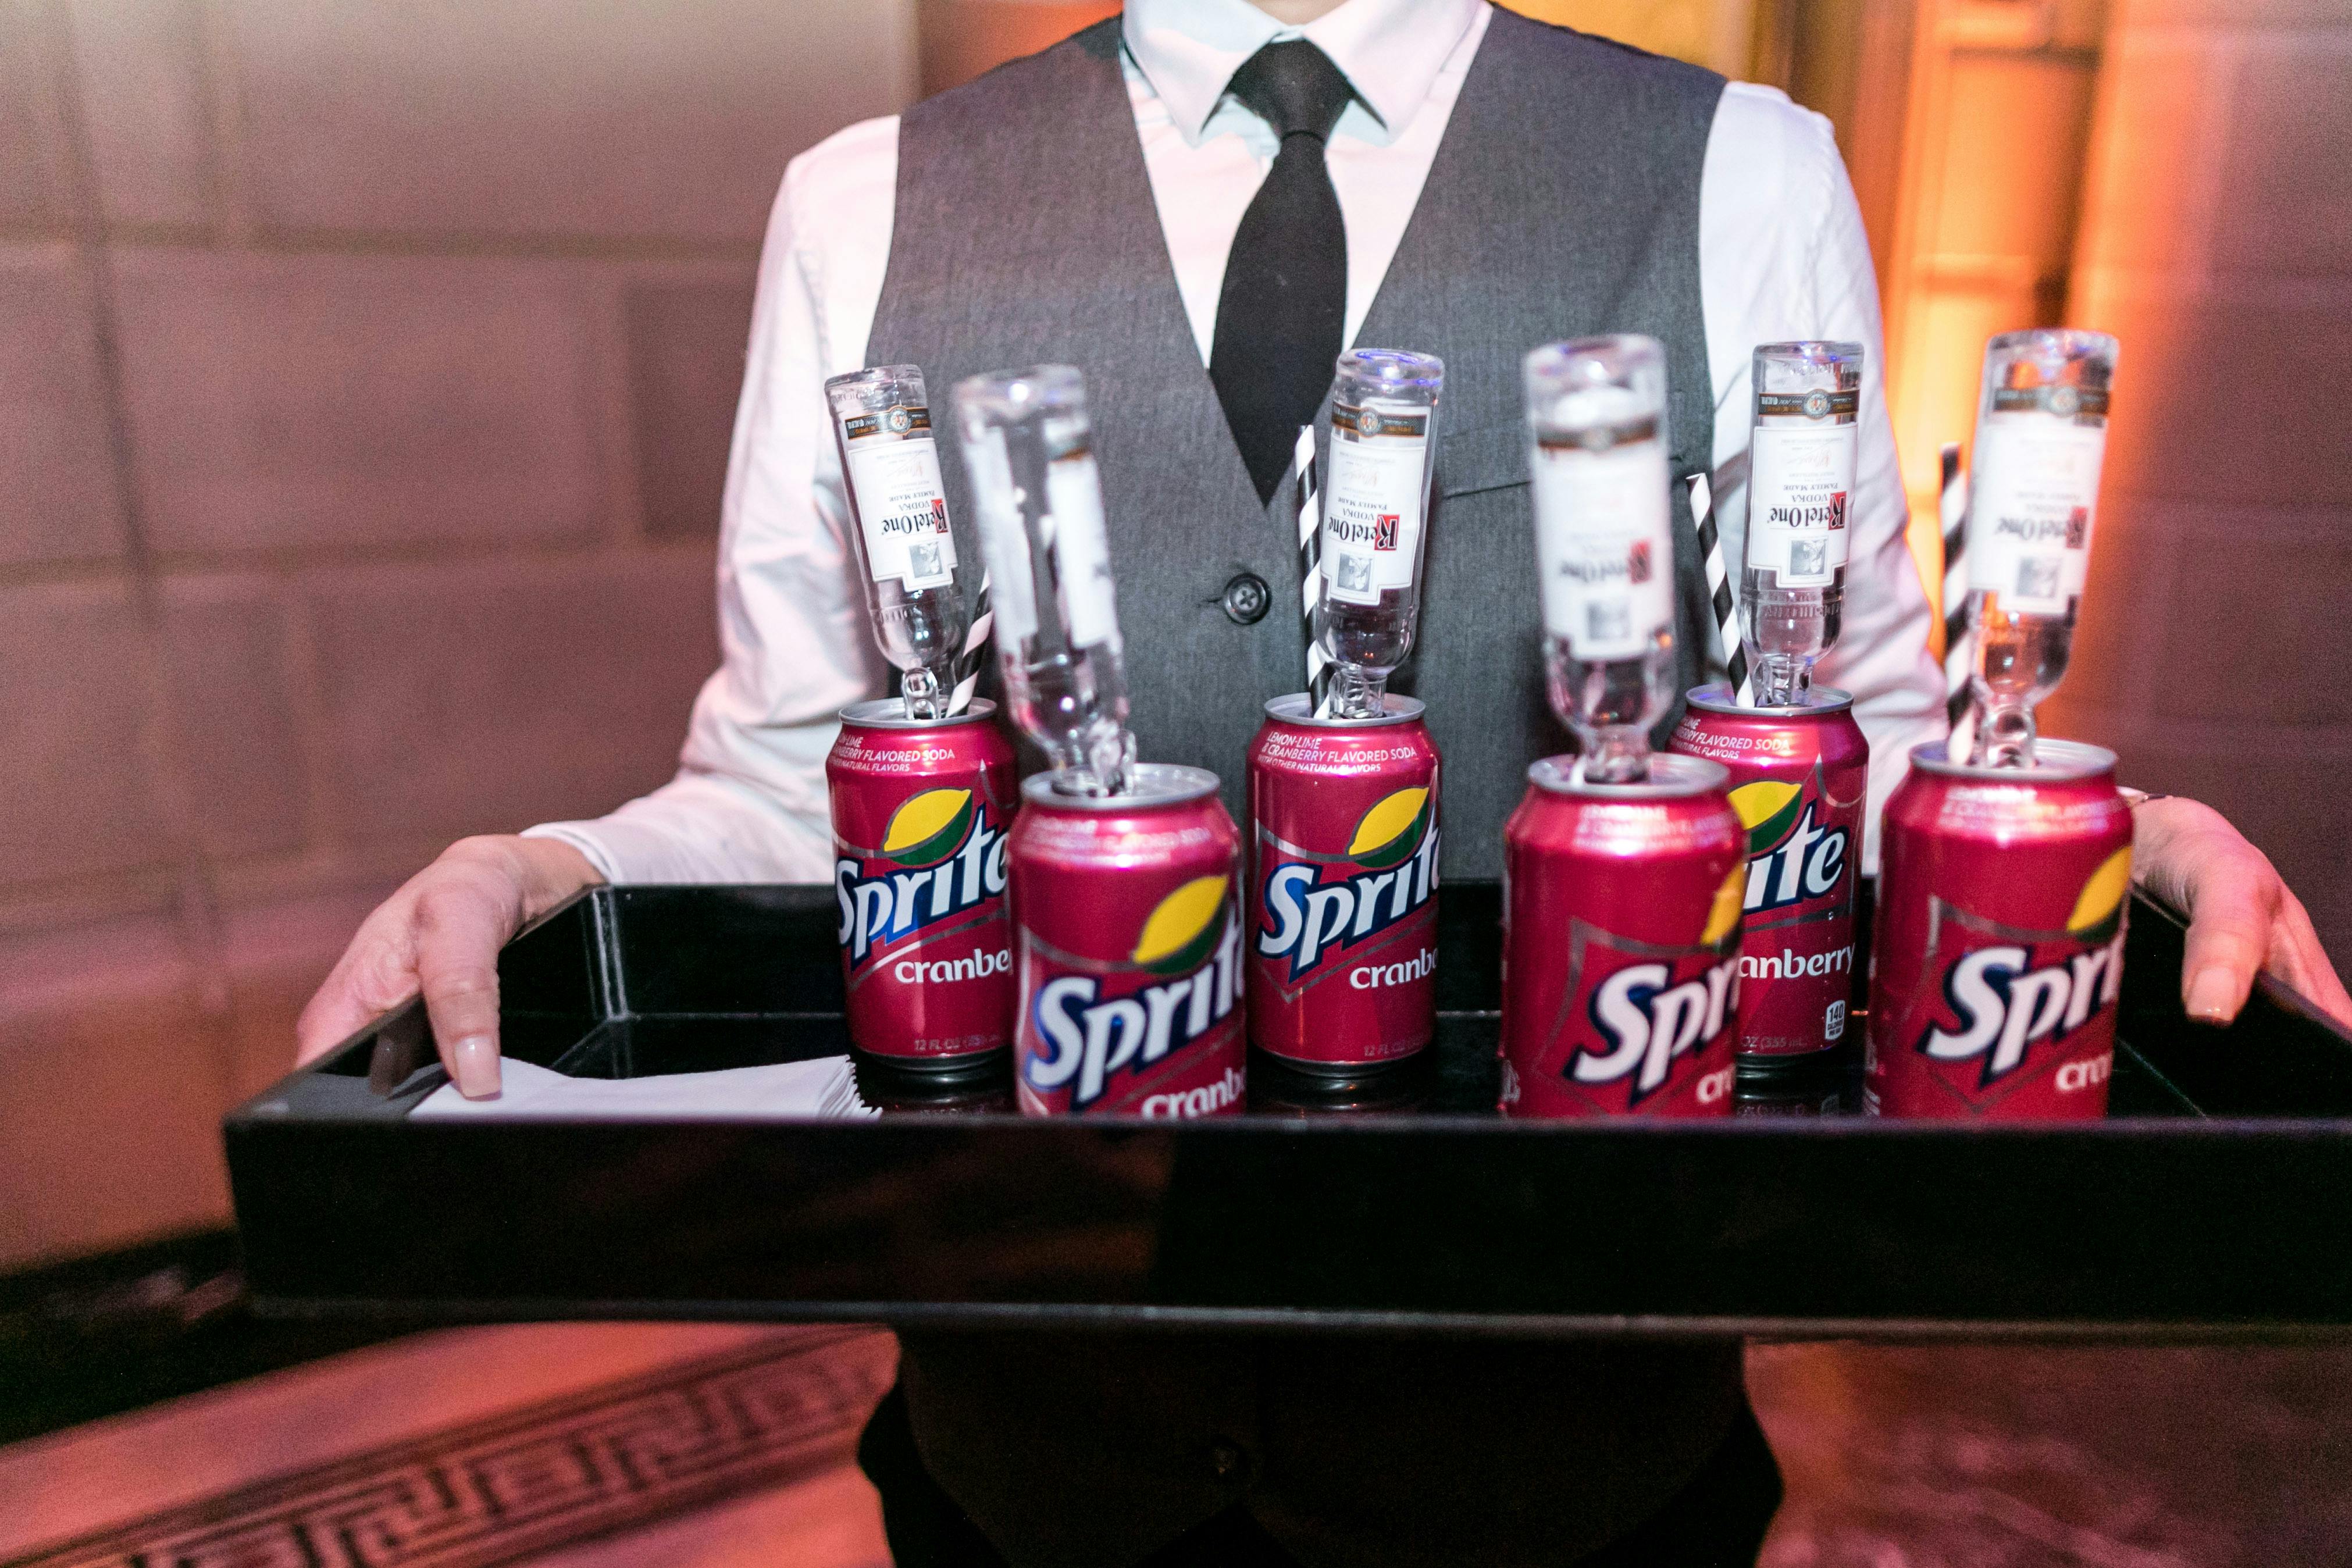 Extravagant 40th Birthday Celebration at Gotham Hall in New York, NY With Red Sprite Cans and Upside Down Mini Vodka Bottles | PartySlate